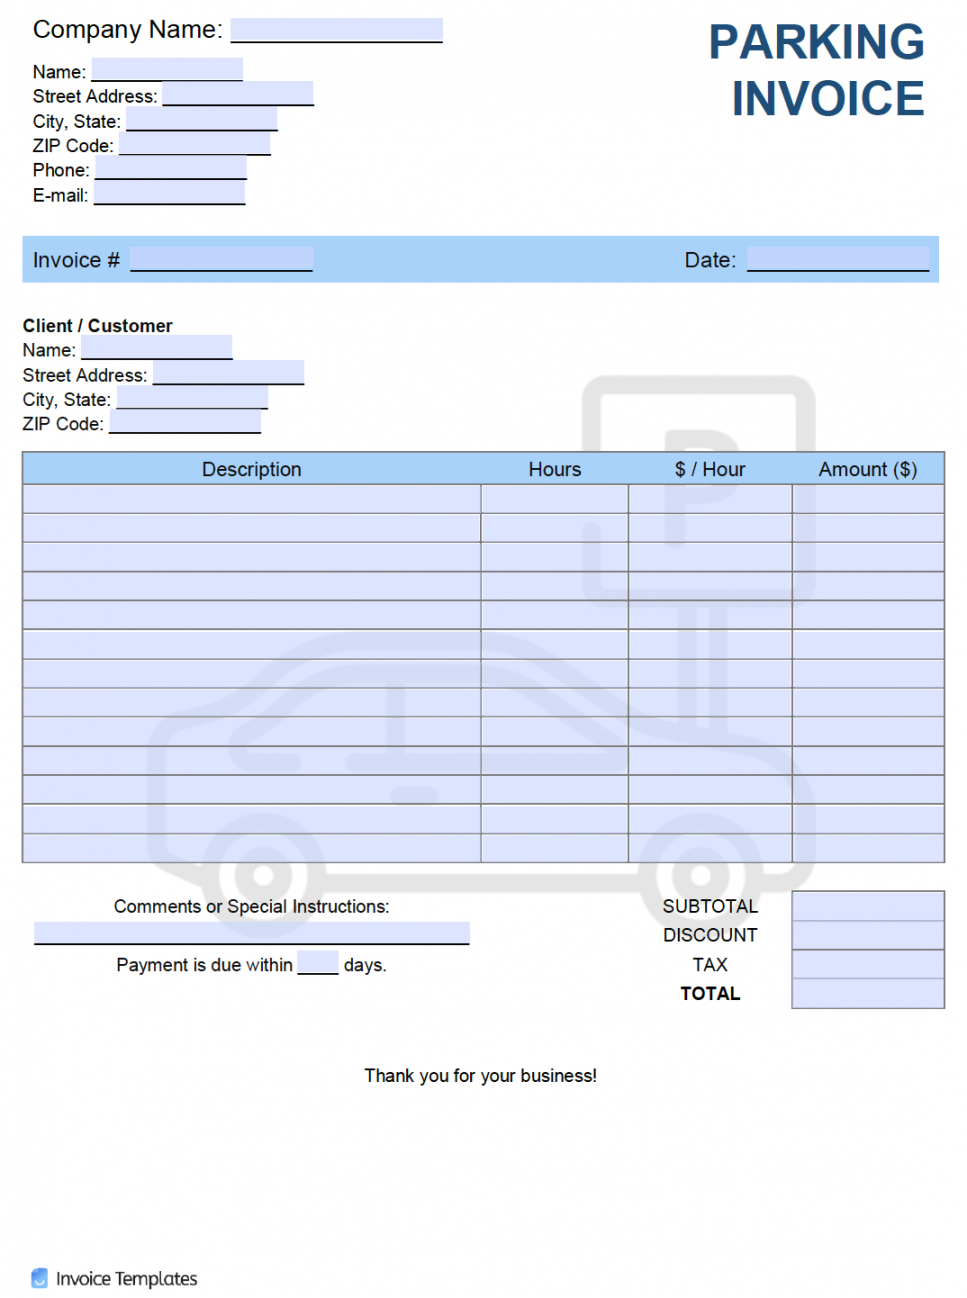 editable free parking invoice template  pdf  word  excel basis of estimate template sample